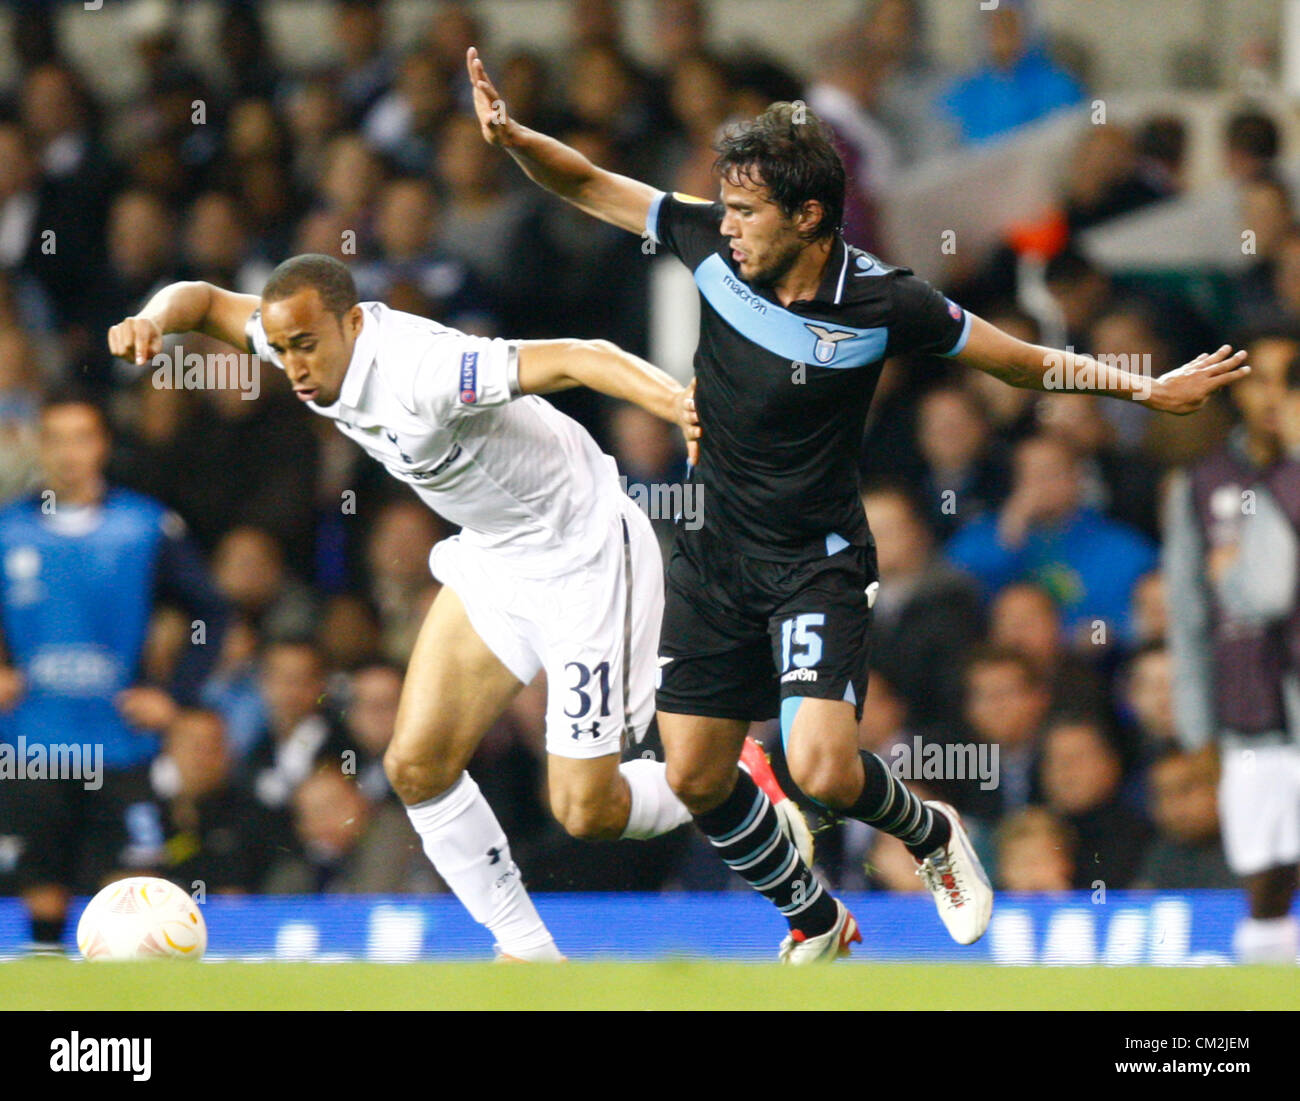 20.09.2012 London, ENGLAND:  Alvaro Gonzalez of S.S. Lazio and Andros Townsend of Tottenham Hotspur in action during the Europa League Group J match between Tottenham Hotspur and SS Lazio at White Hart Lane Stadium Stock Photo